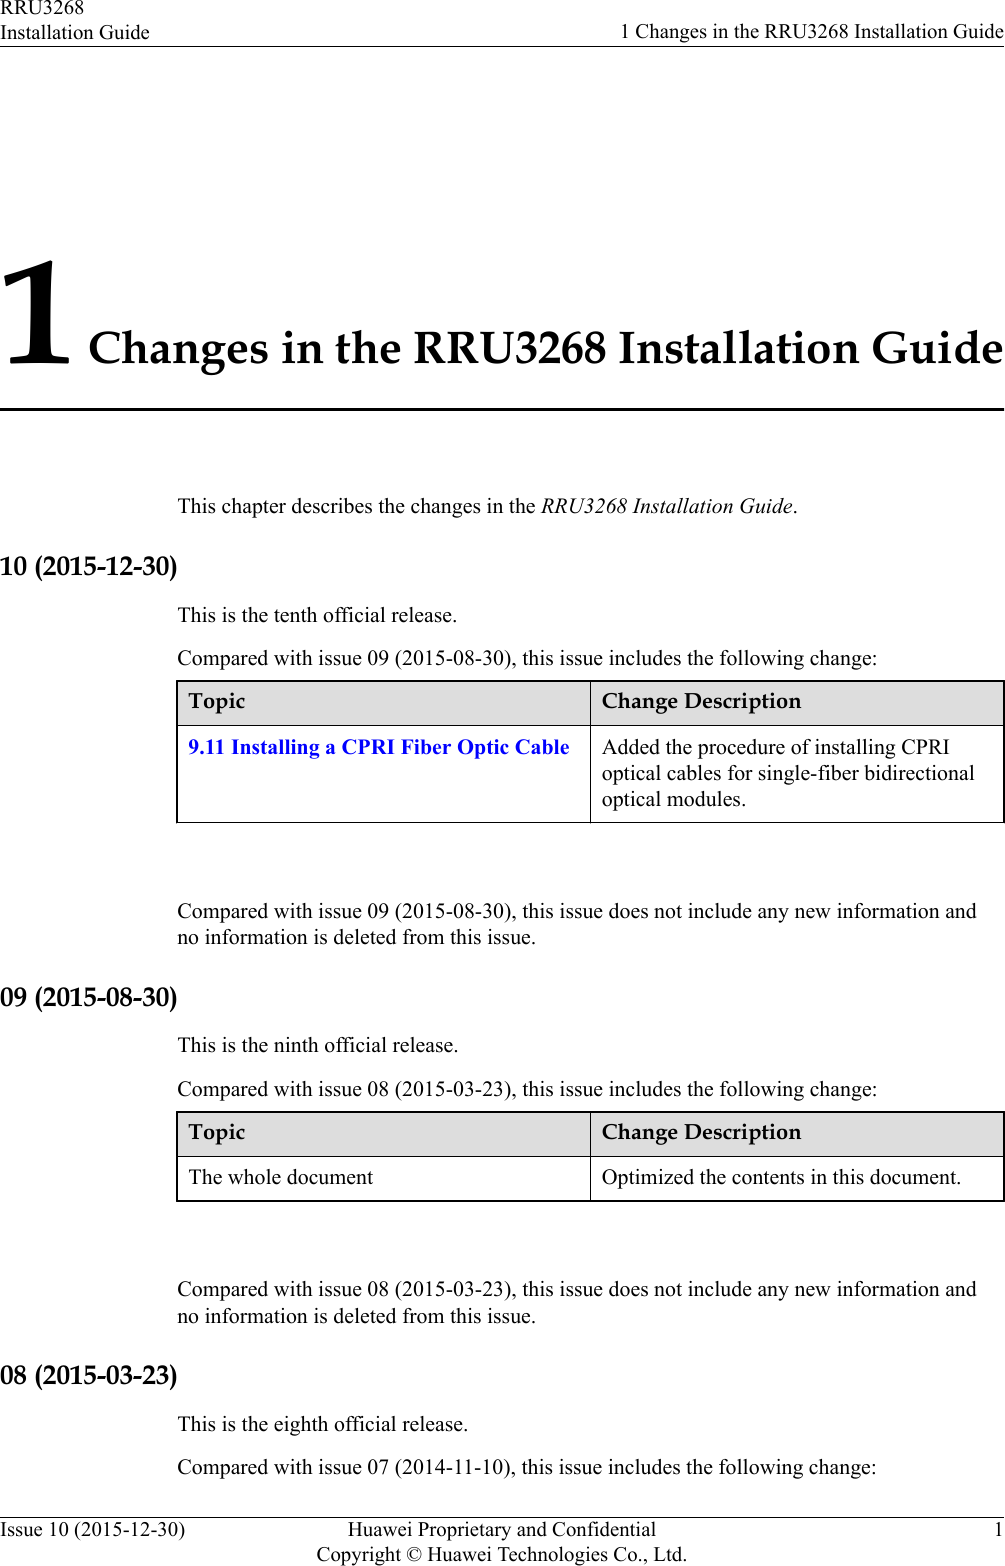 1 Changes in the RRU3268 Installation GuideThis chapter describes the changes in the RRU3268 Installation Guide.10 (2015-12-30)This is the tenth official release.Compared with issue 09 (2015-08-30), this issue includes the following change:Topic Change Description9.11 Installing a CPRI Fiber Optic Cable Added the procedure of installing CPRIoptical cables for single-fiber bidirectionaloptical modules. Compared with issue 09 (2015-08-30), this issue does not include any new information andno information is deleted from this issue.09 (2015-08-30)This is the ninth official release.Compared with issue 08 (2015-03-23), this issue includes the following change:Topic Change DescriptionThe whole document Optimized the contents in this document. Compared with issue 08 (2015-03-23), this issue does not include any new information andno information is deleted from this issue.08 (2015-03-23)This is the eighth official release.Compared with issue 07 (2014-11-10), this issue includes the following change:RRU3268Installation Guide 1 Changes in the RRU3268 Installation GuideIssue 10 (2015-12-30) Huawei Proprietary and ConfidentialCopyright © Huawei Technologies Co., Ltd.1